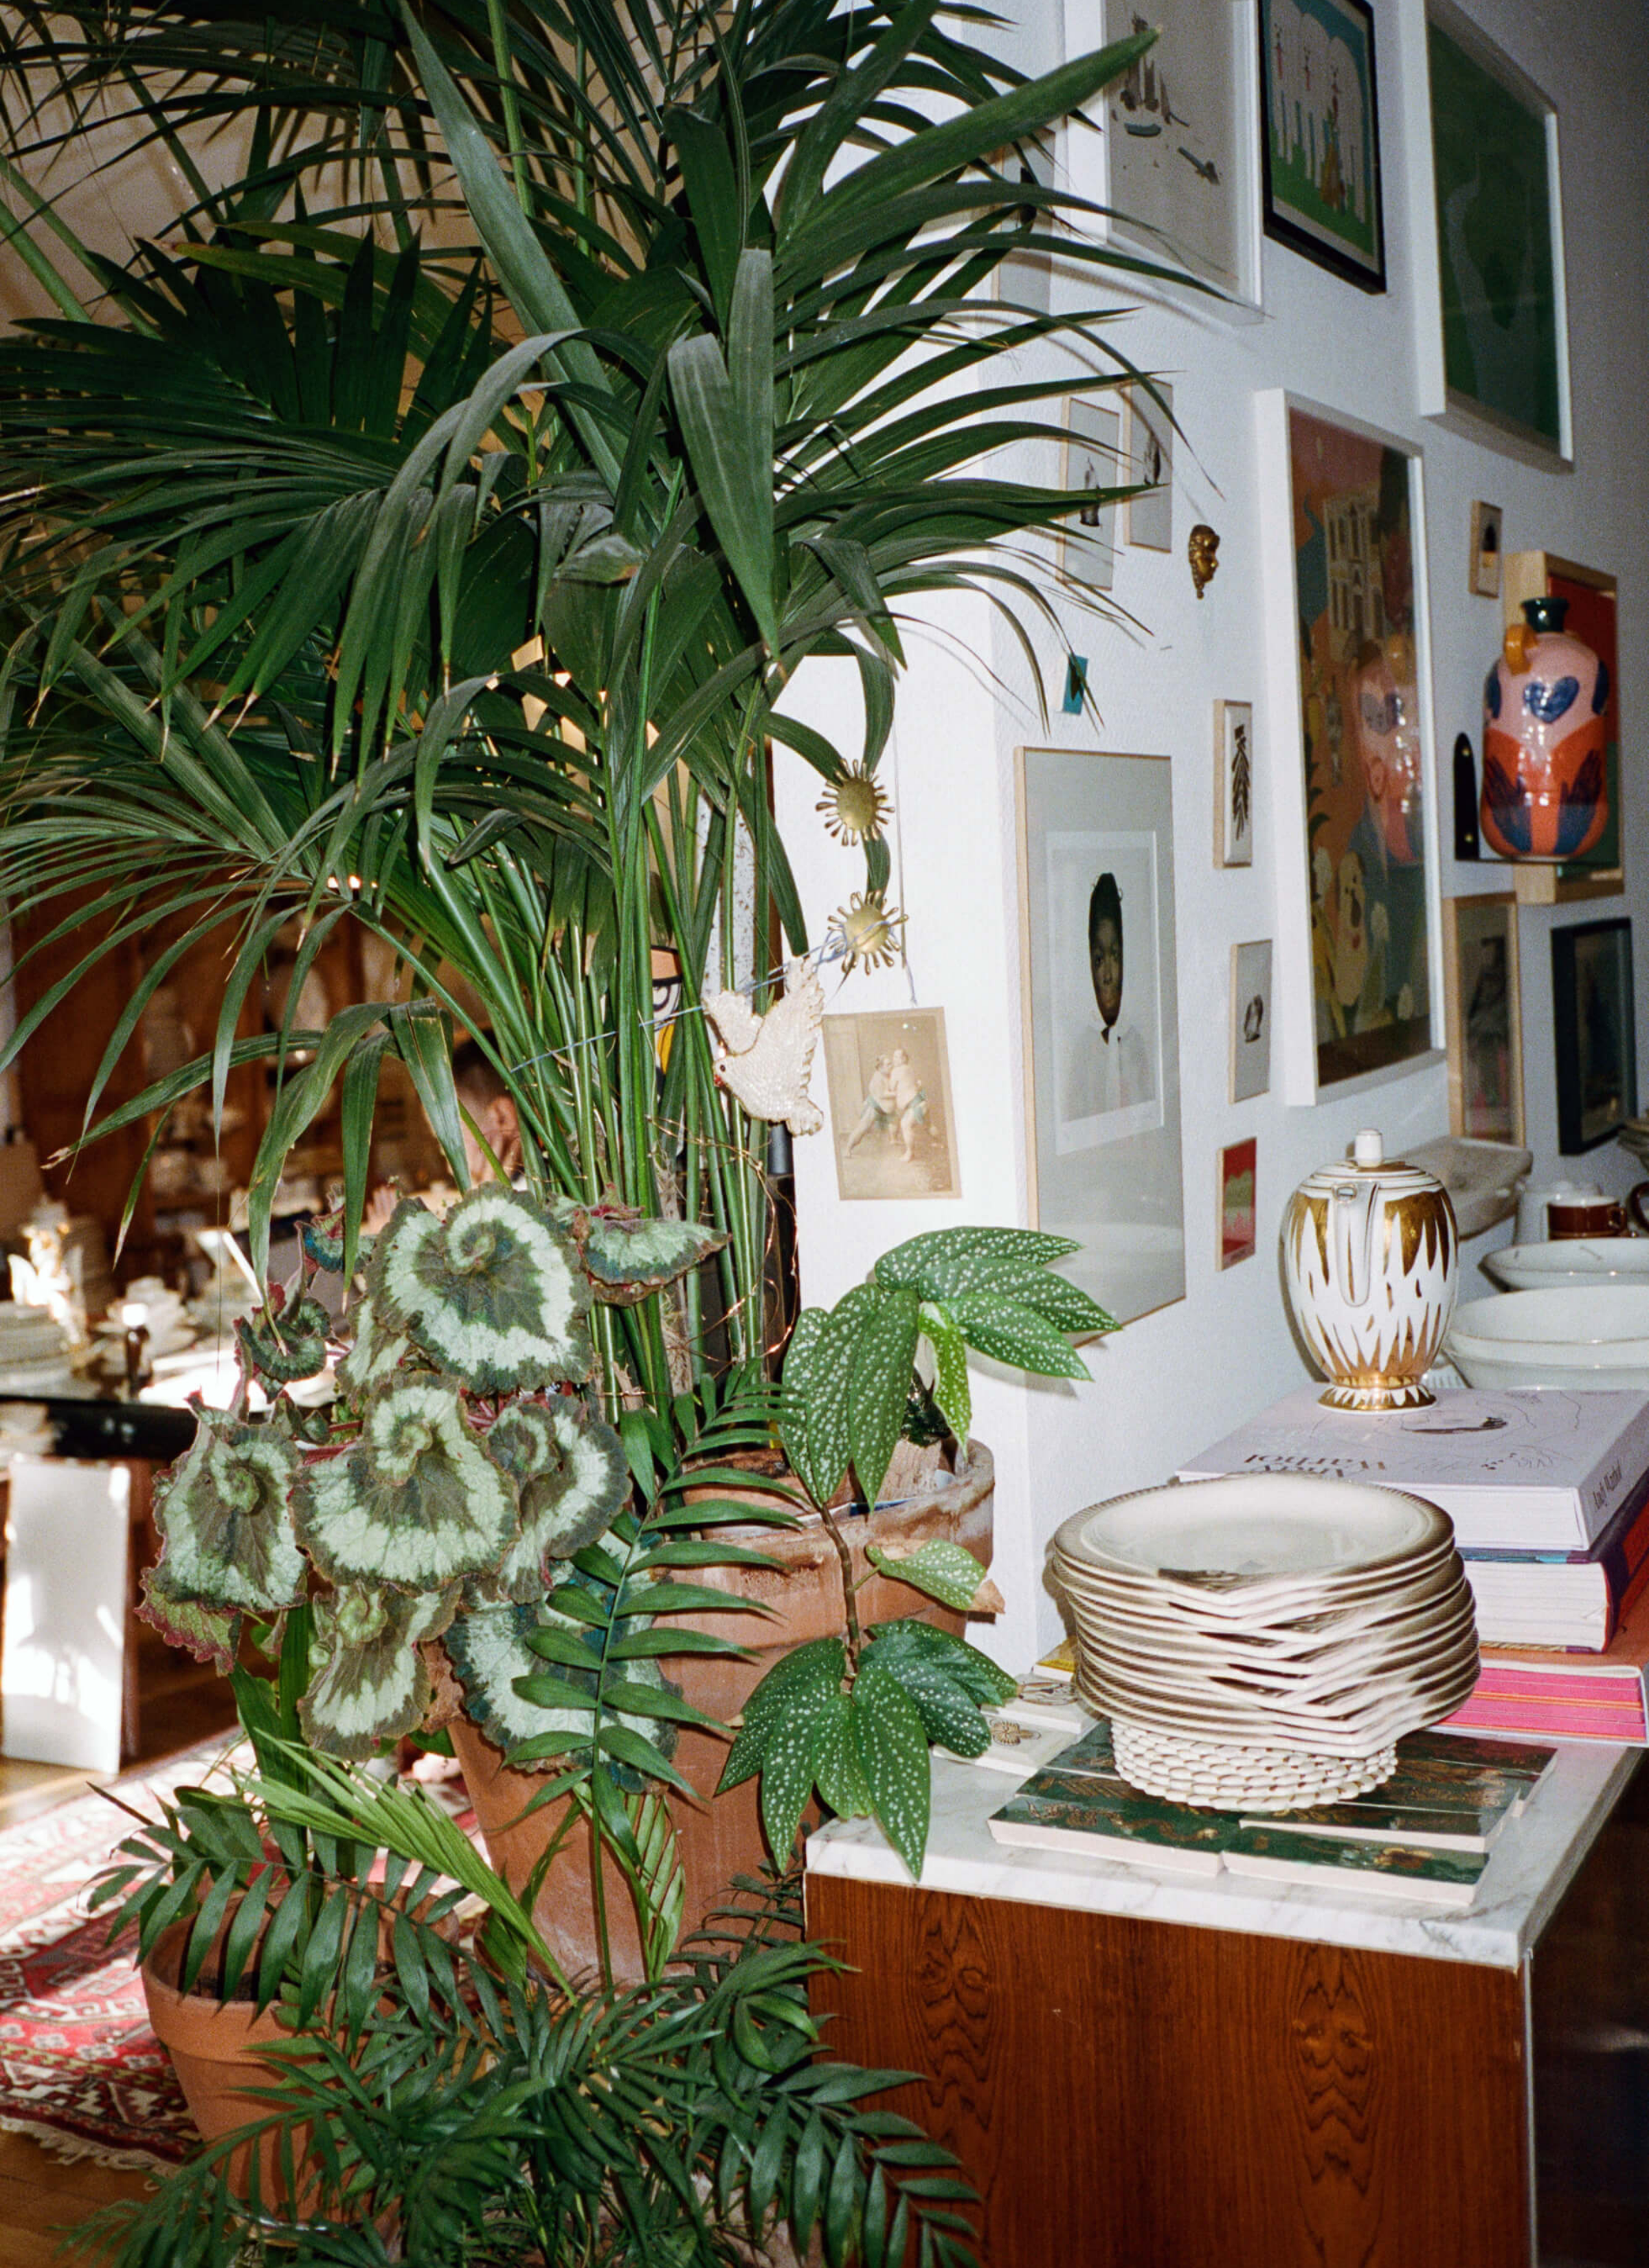 Different kinds of potted plants sitting next to a wall that had many images and paintings hung on the wall. And there is a pile of plates and books on the table next to the plants..